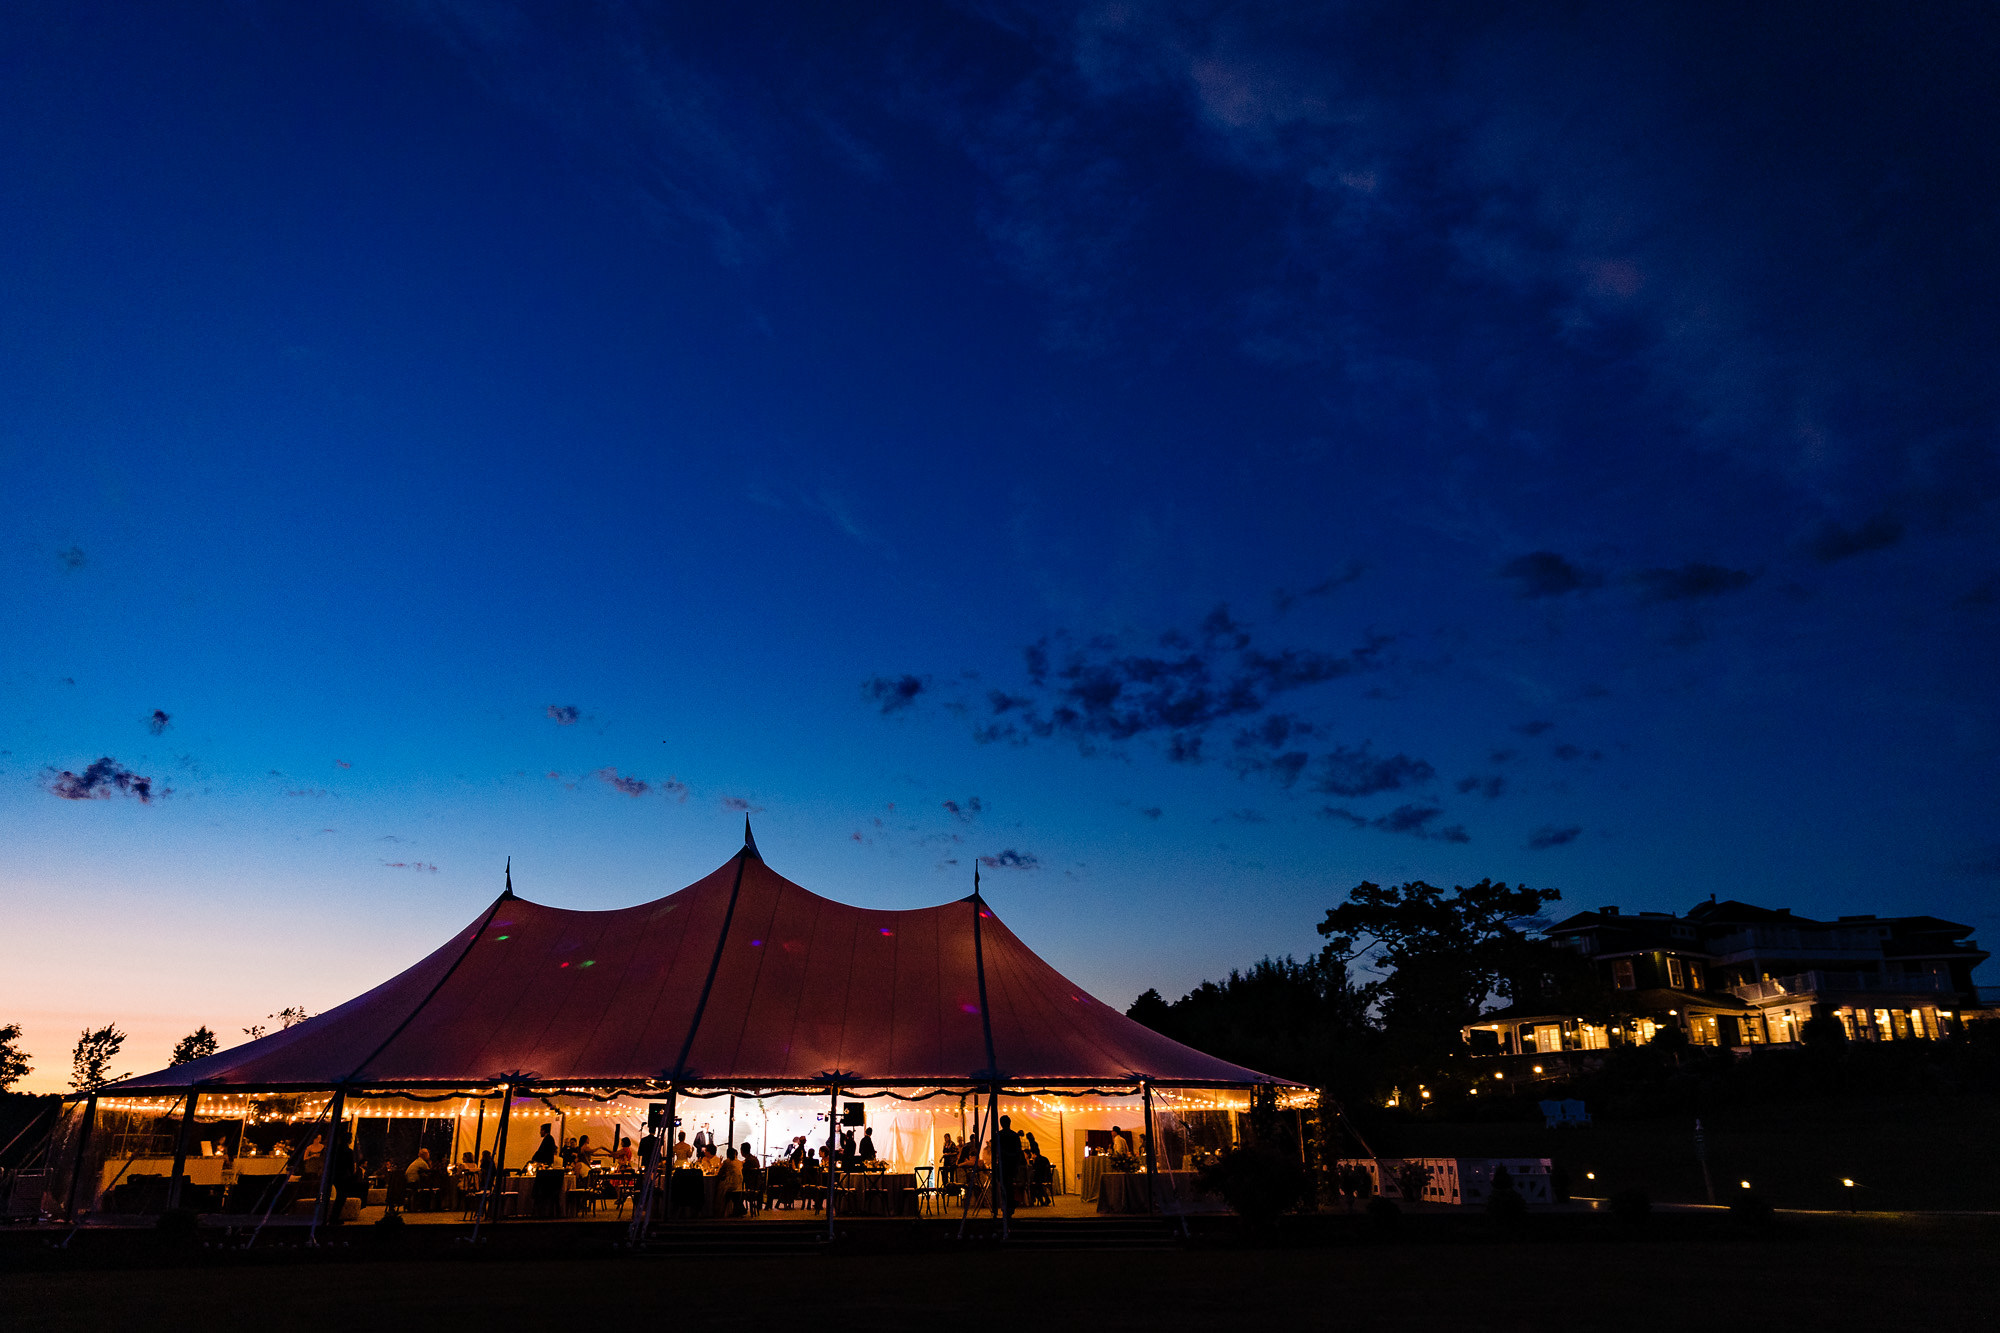 A wedding reception under a sailcloth tent at a midcoast wedding in Maine